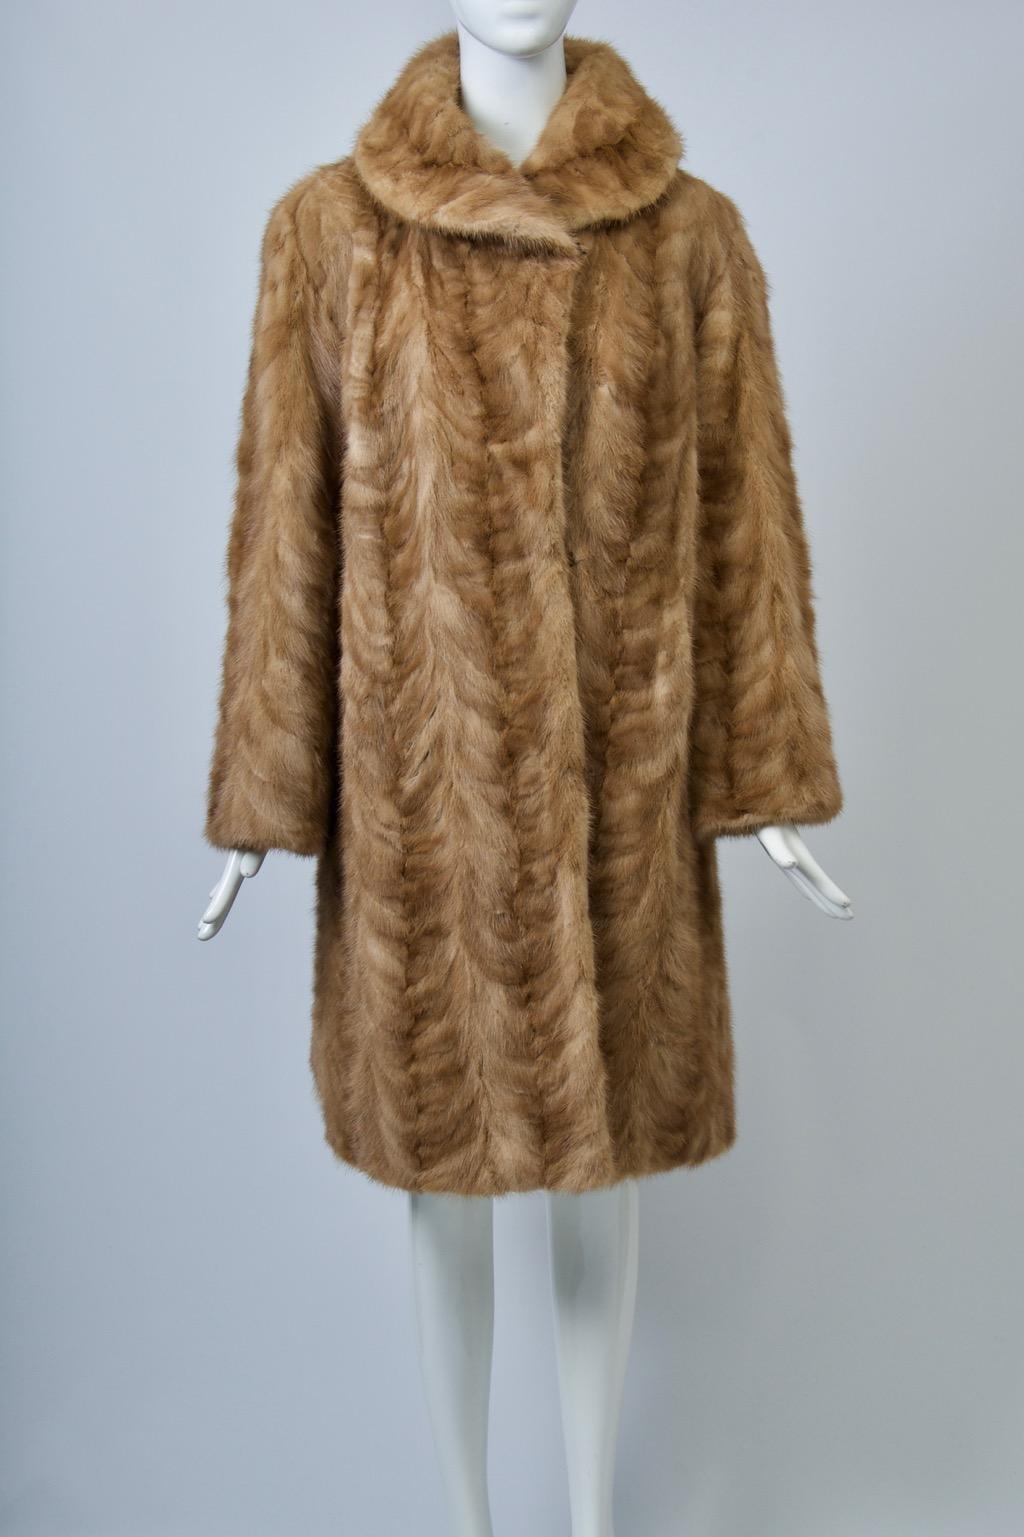 Honey colored mink coat, pieced in a herringbone pattern, features a straight silhouette with some fullness in back, straight set-in sleeves, and a rounded collar, as well as slash pockets. The interior boasts a clean embroidered lining.